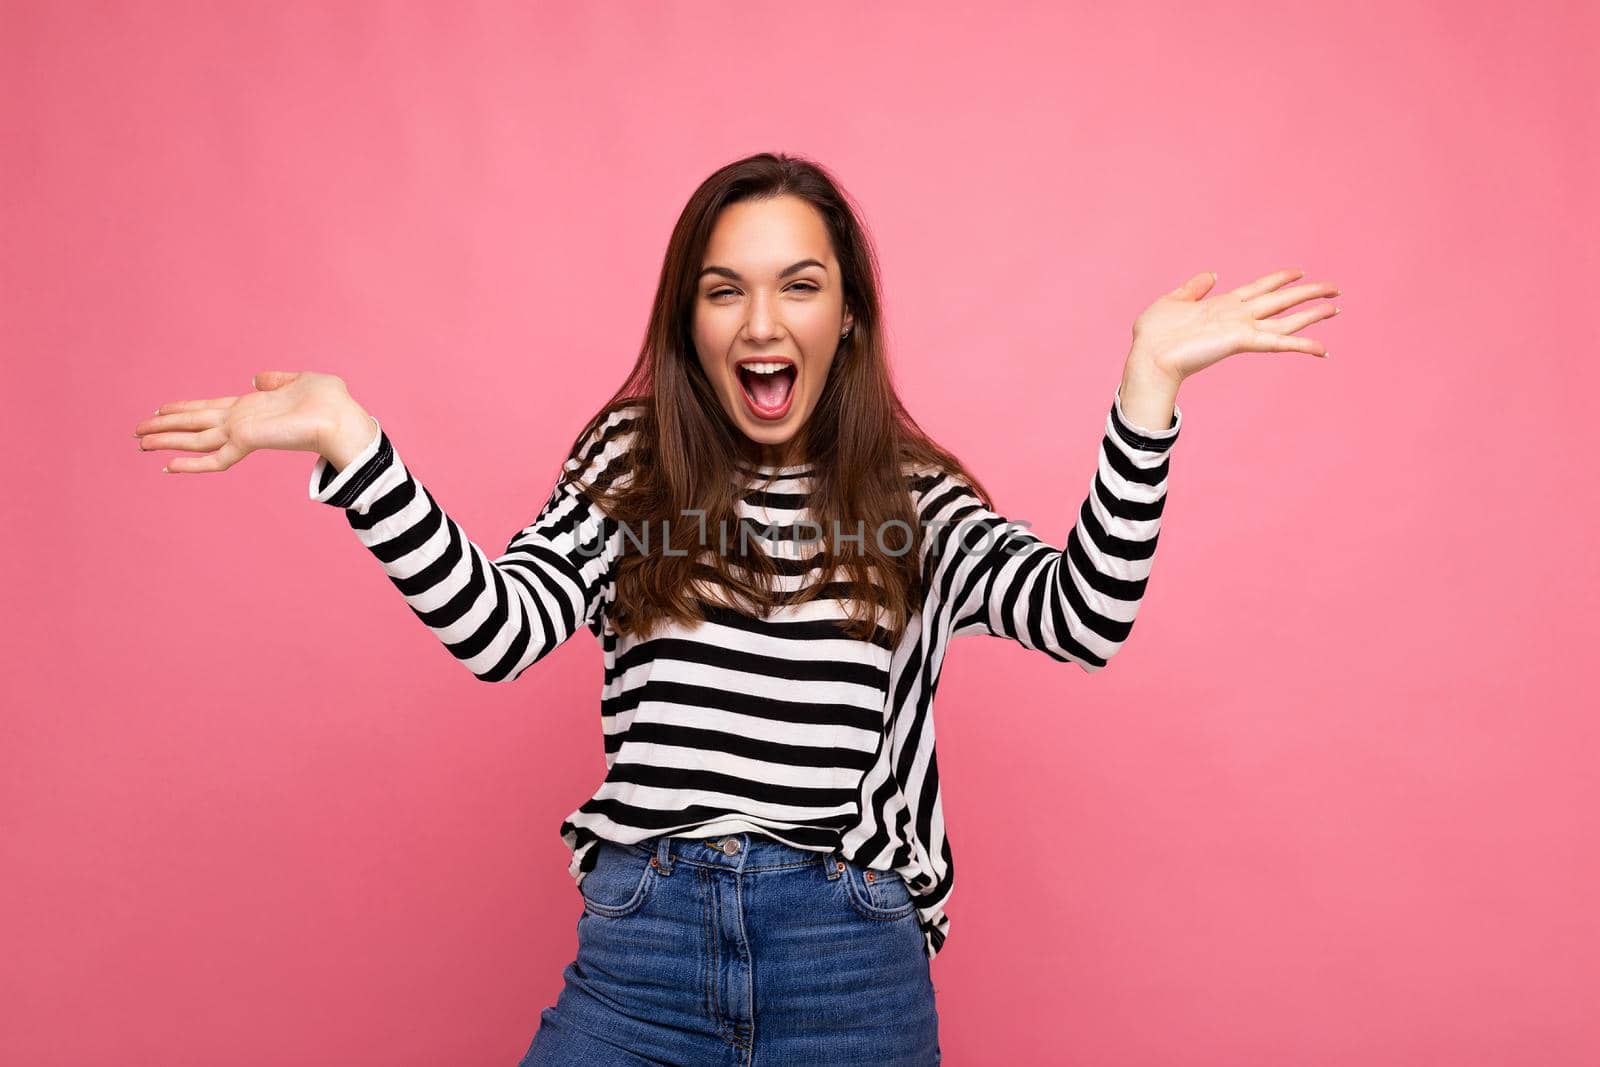 Portrait of young emotional positive shocked surprised happy beautiful brunette woman with sincere emotions in casual striped pullover isolated on pink background with copy space.